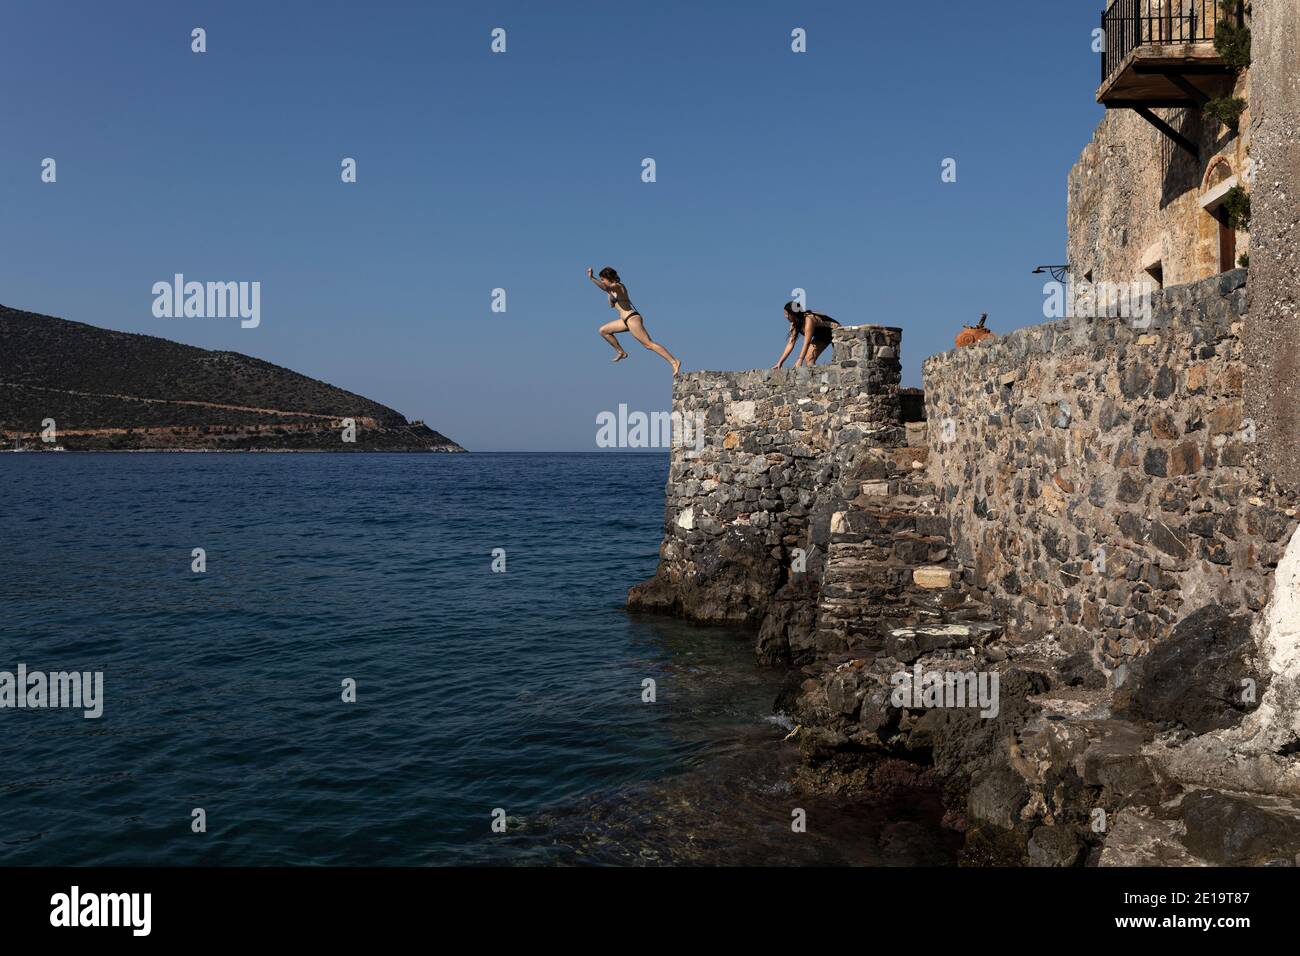 A girl jumps into the sea at the port of Kiparissi village, Peloponnese region, Greece on July 28, 2020. Stock Photo